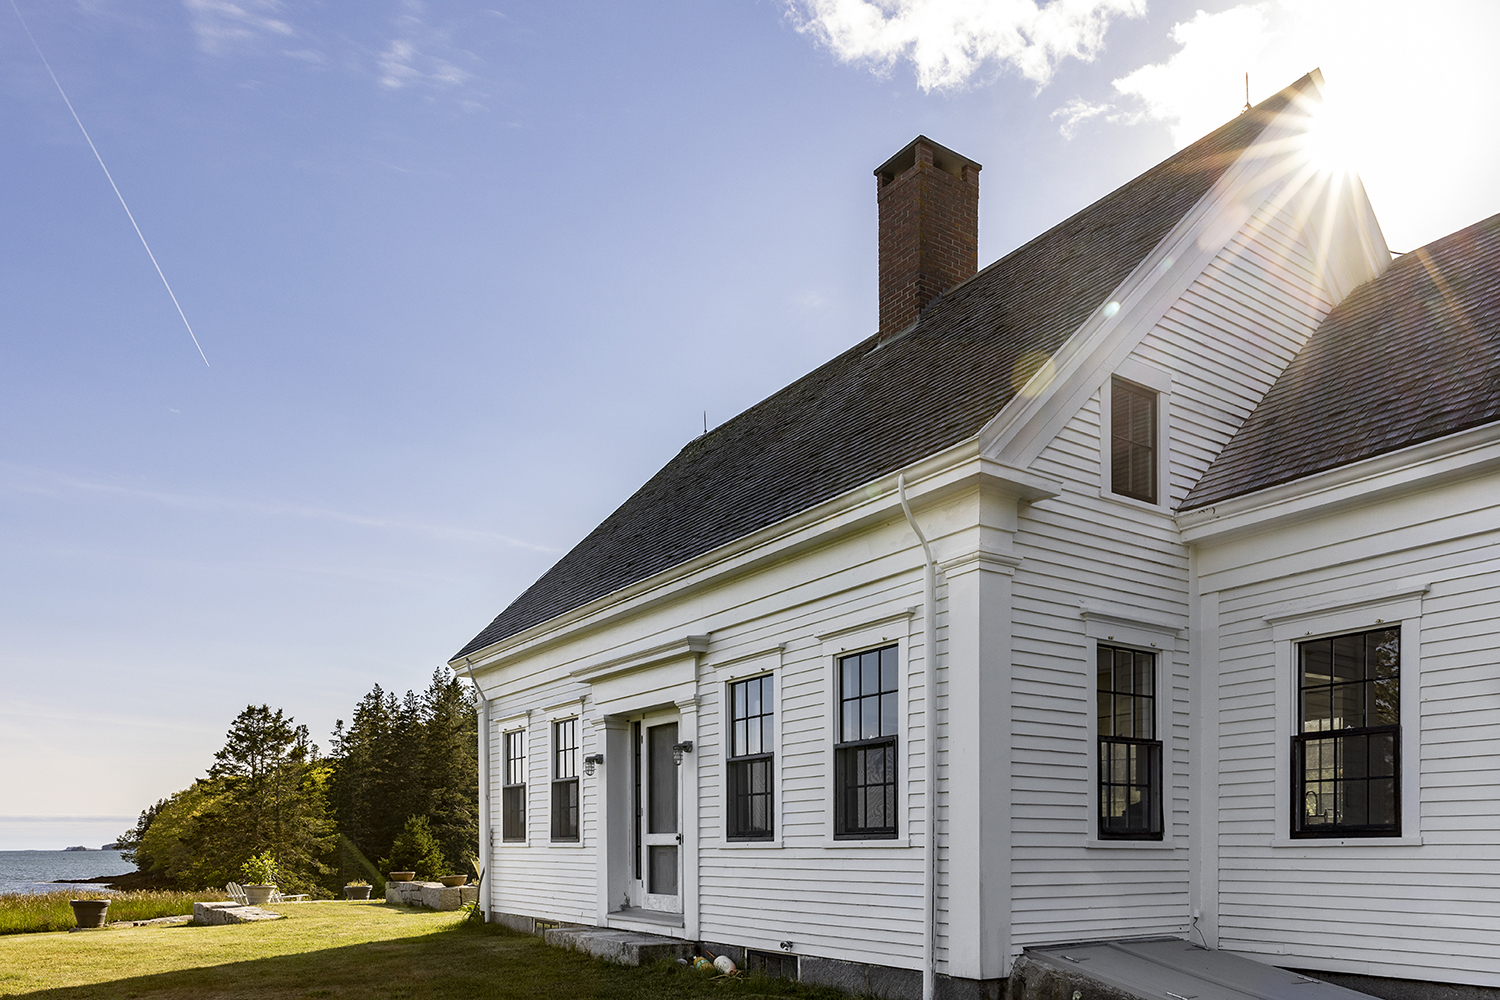 An exterior photo of the renovated saltwater farm house.